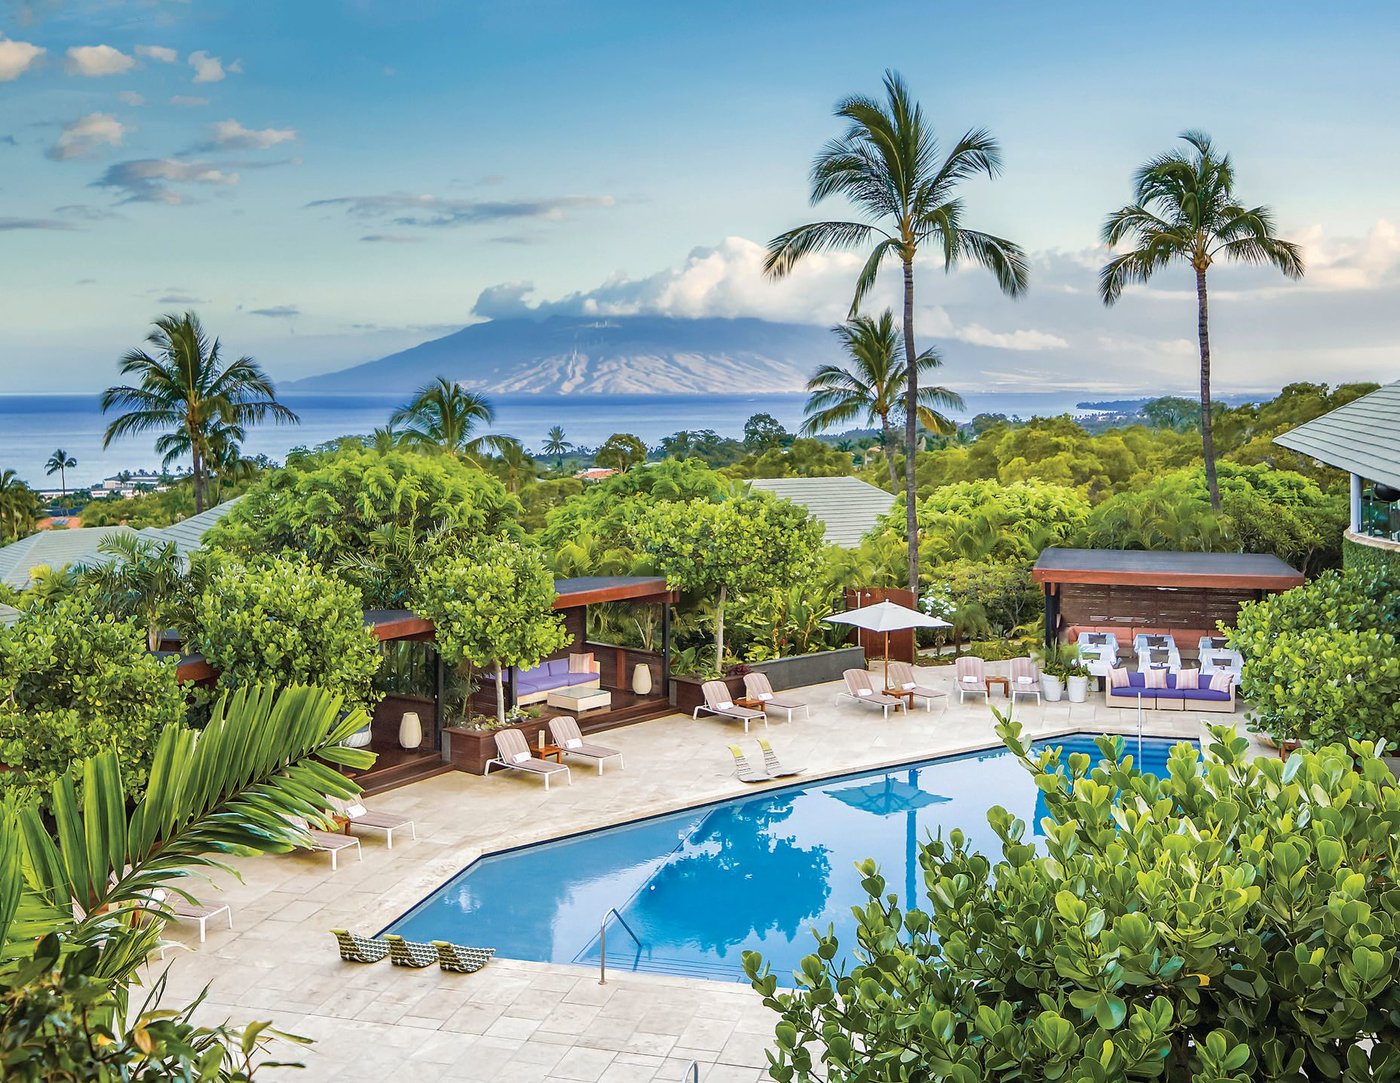 Relax at Hotel Wailea’s serene pool. PHOTO BY JOHN RUSSO/COURTESY OF PRIVATE LABEL COLLECTION